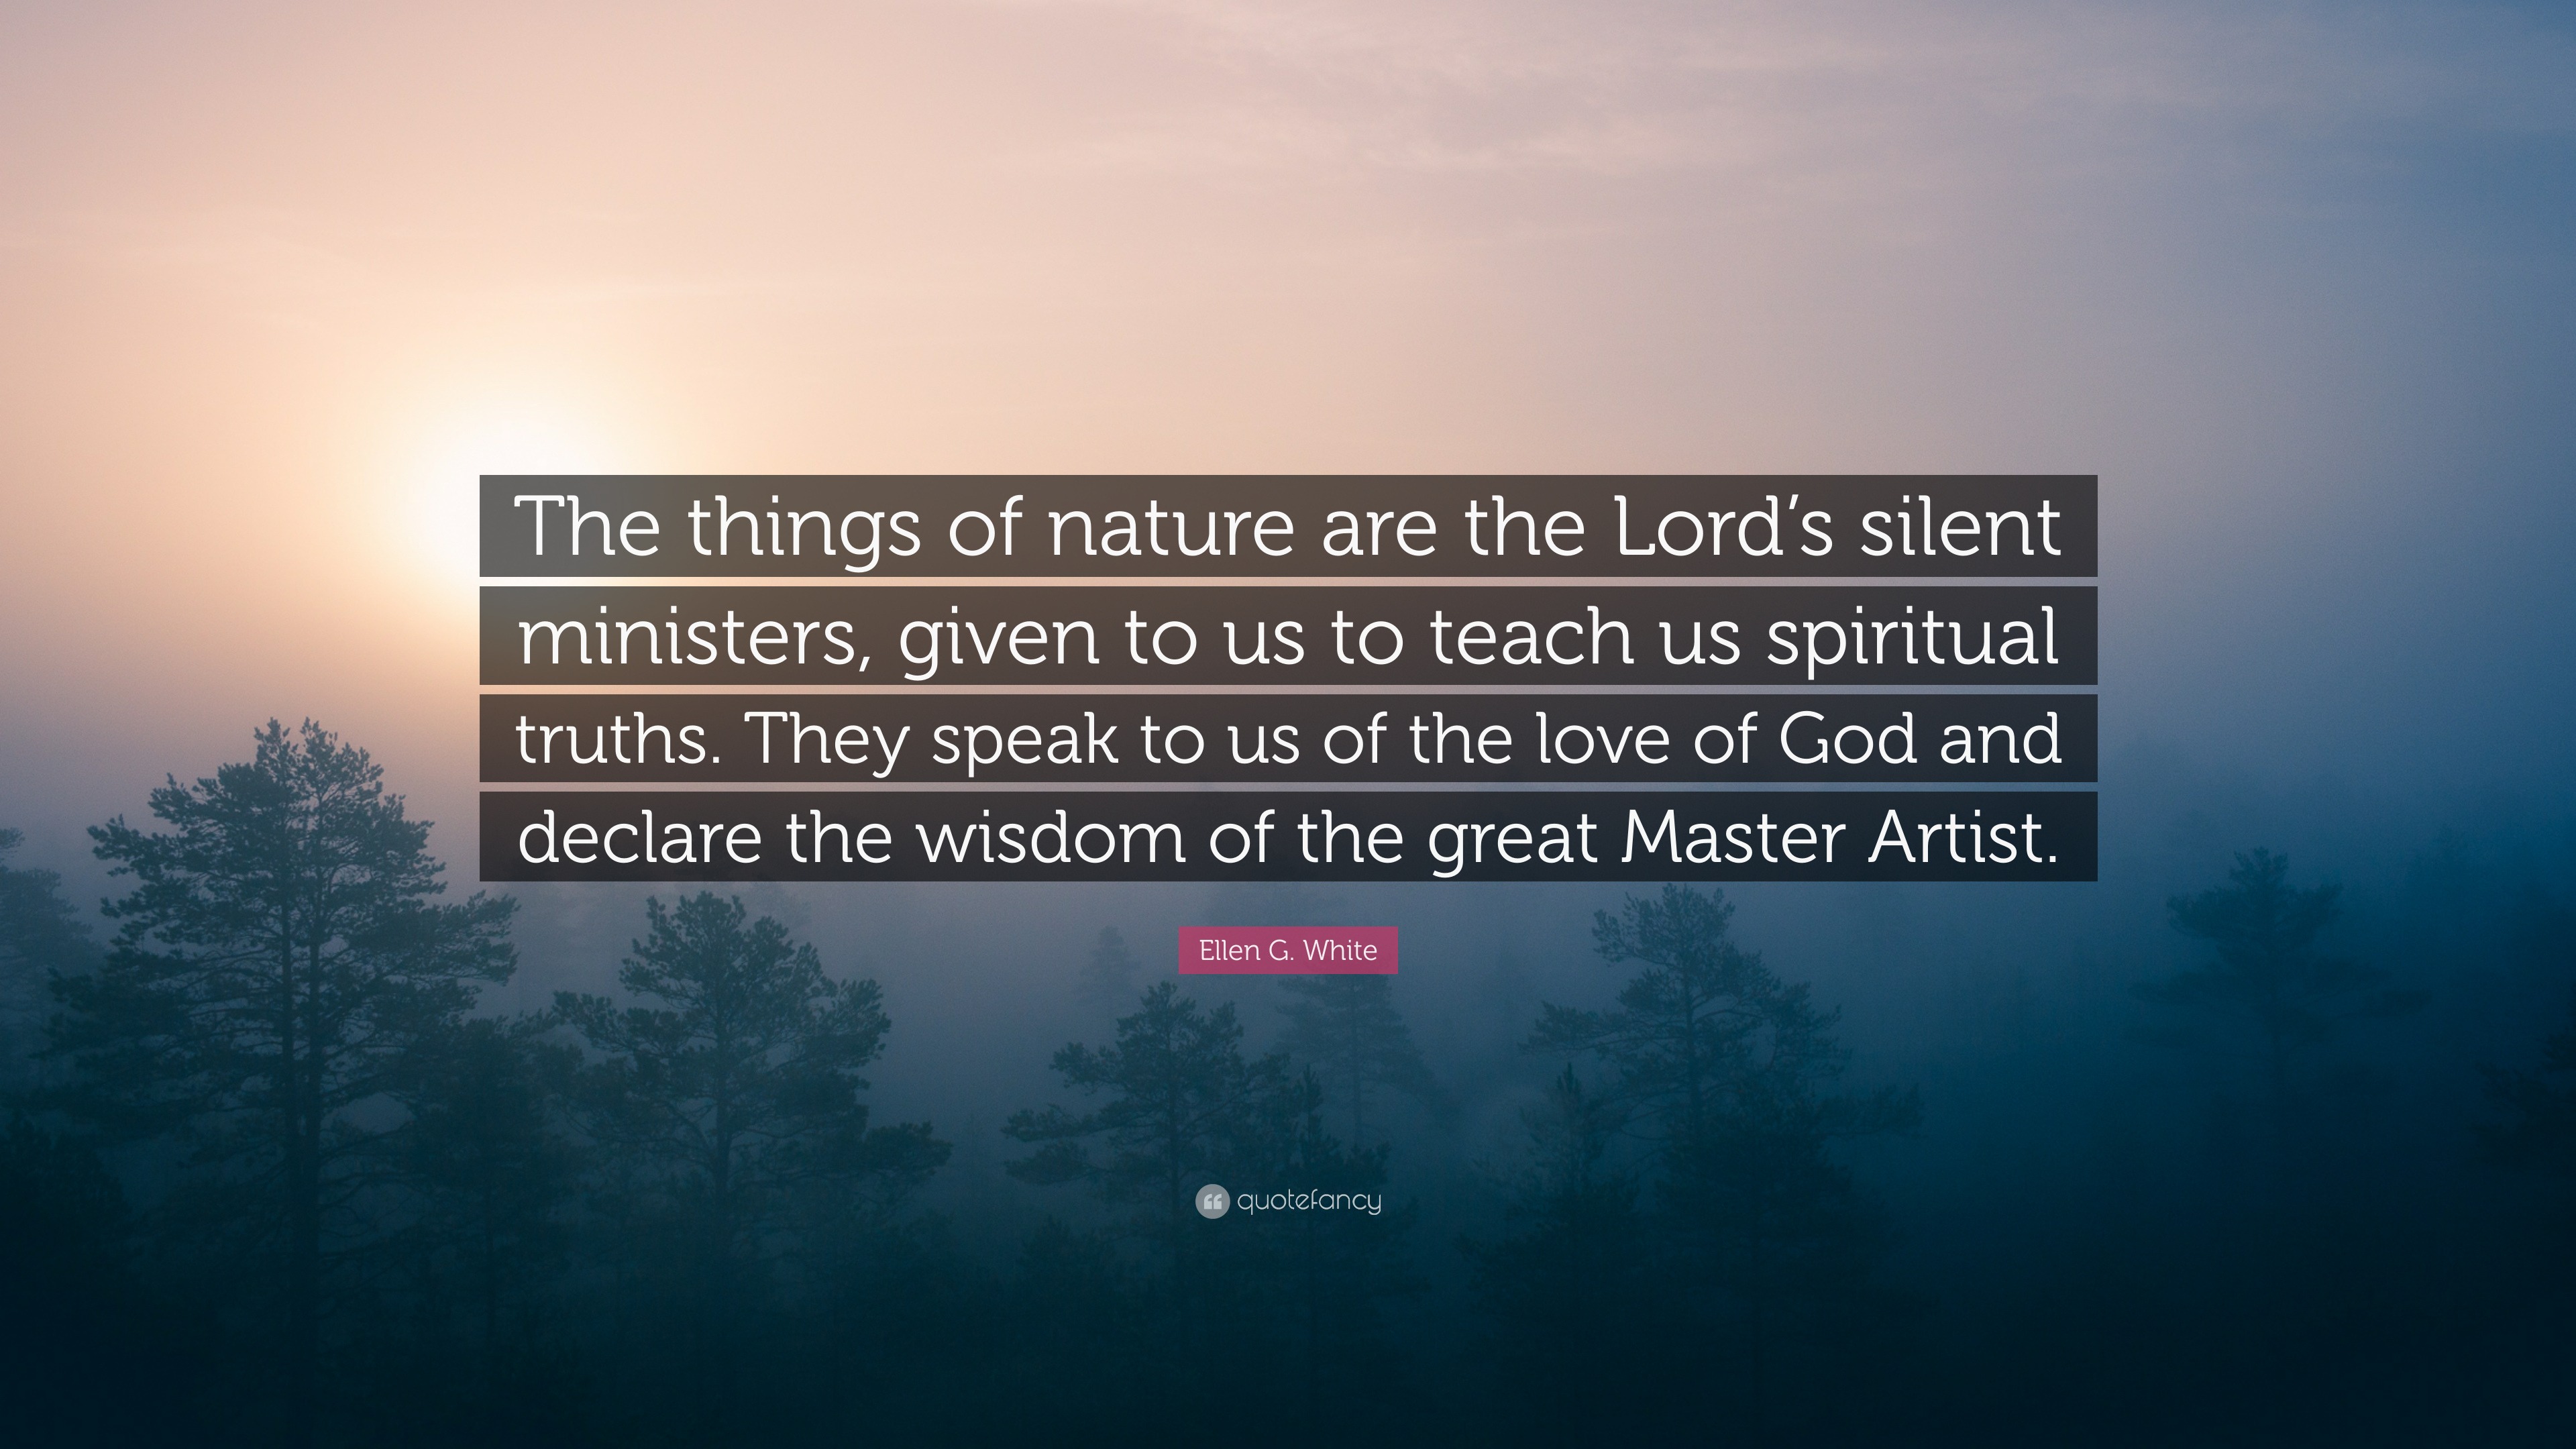 Ellen G. White Quote: “The things of nature are the Lord’s silent